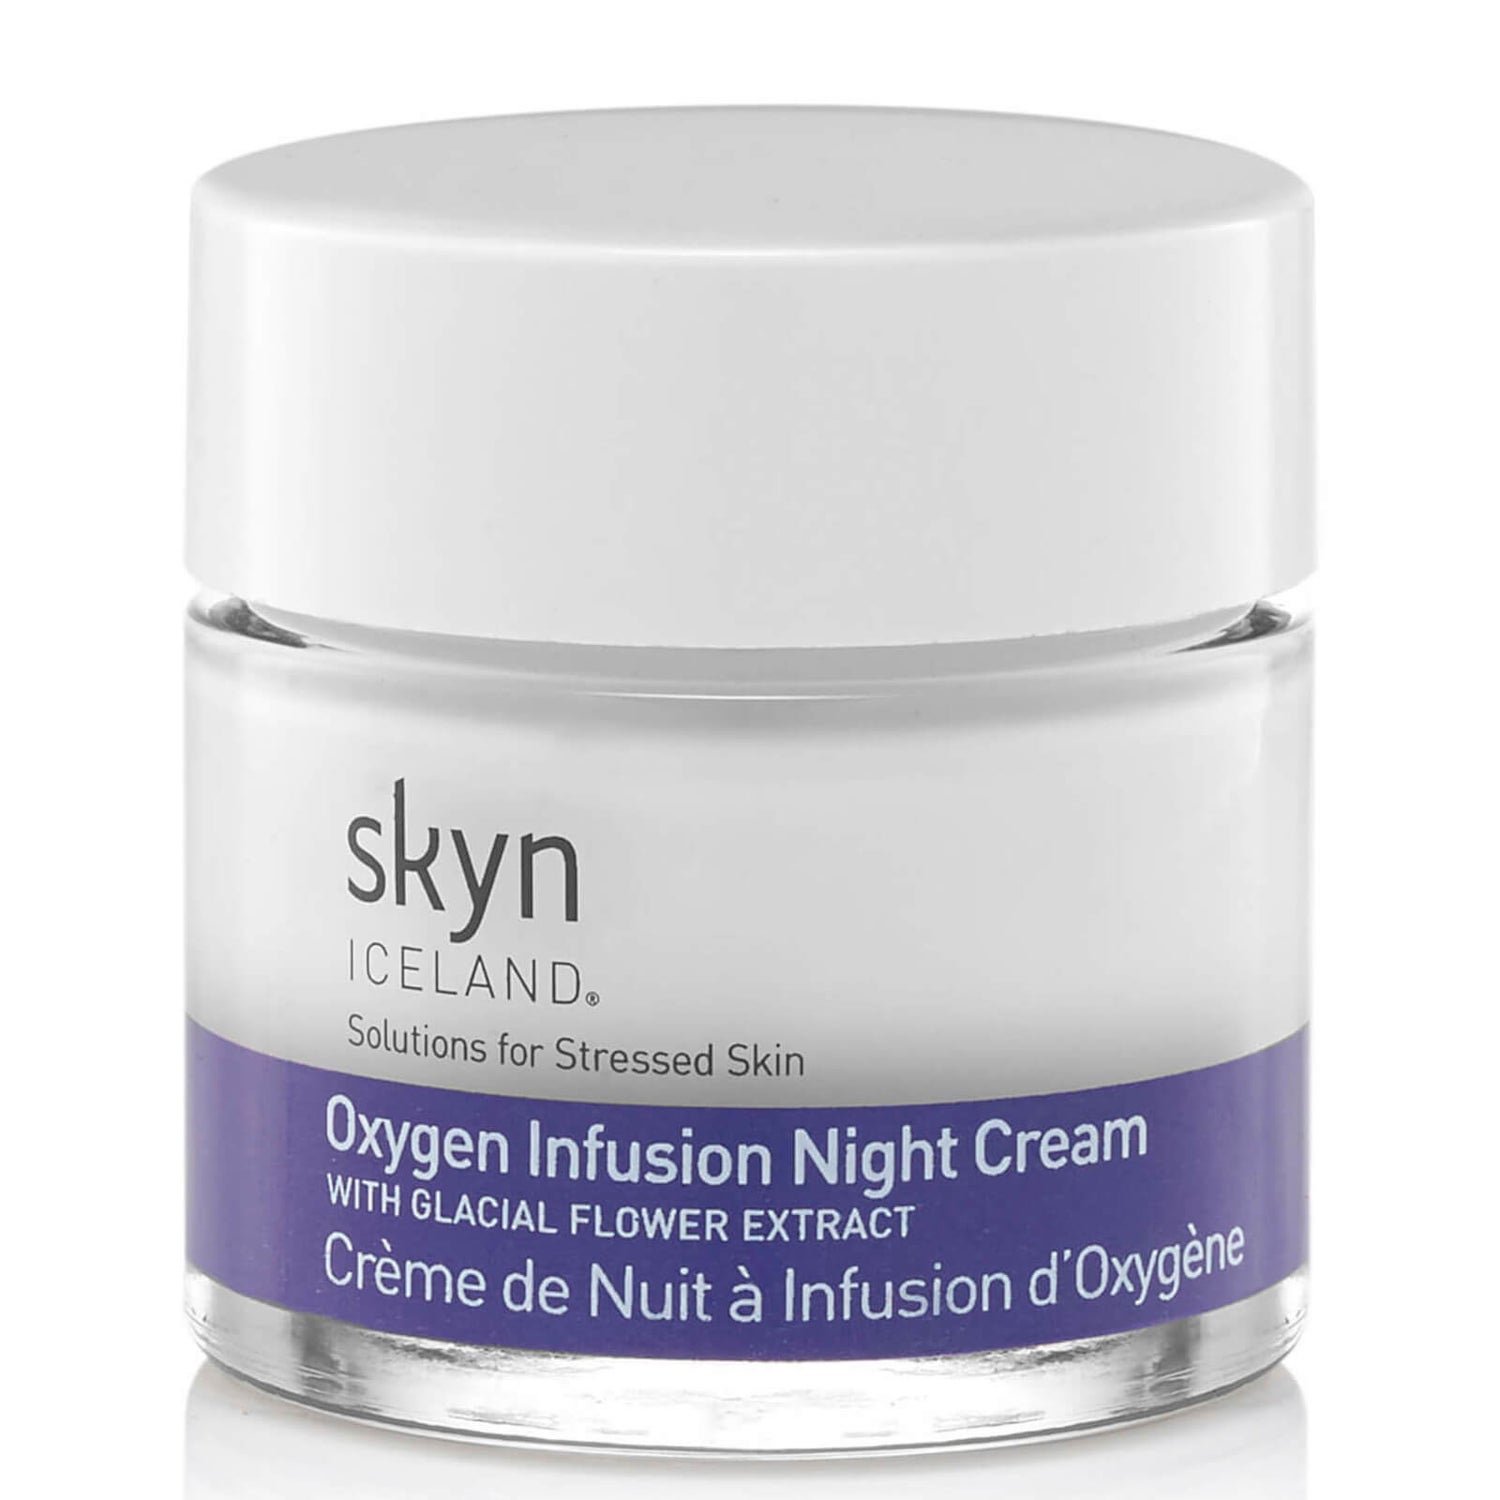 skyn ICELAND Oxygen Infusion Night Cream with Glacial Flower Extract (1.98 oz.)